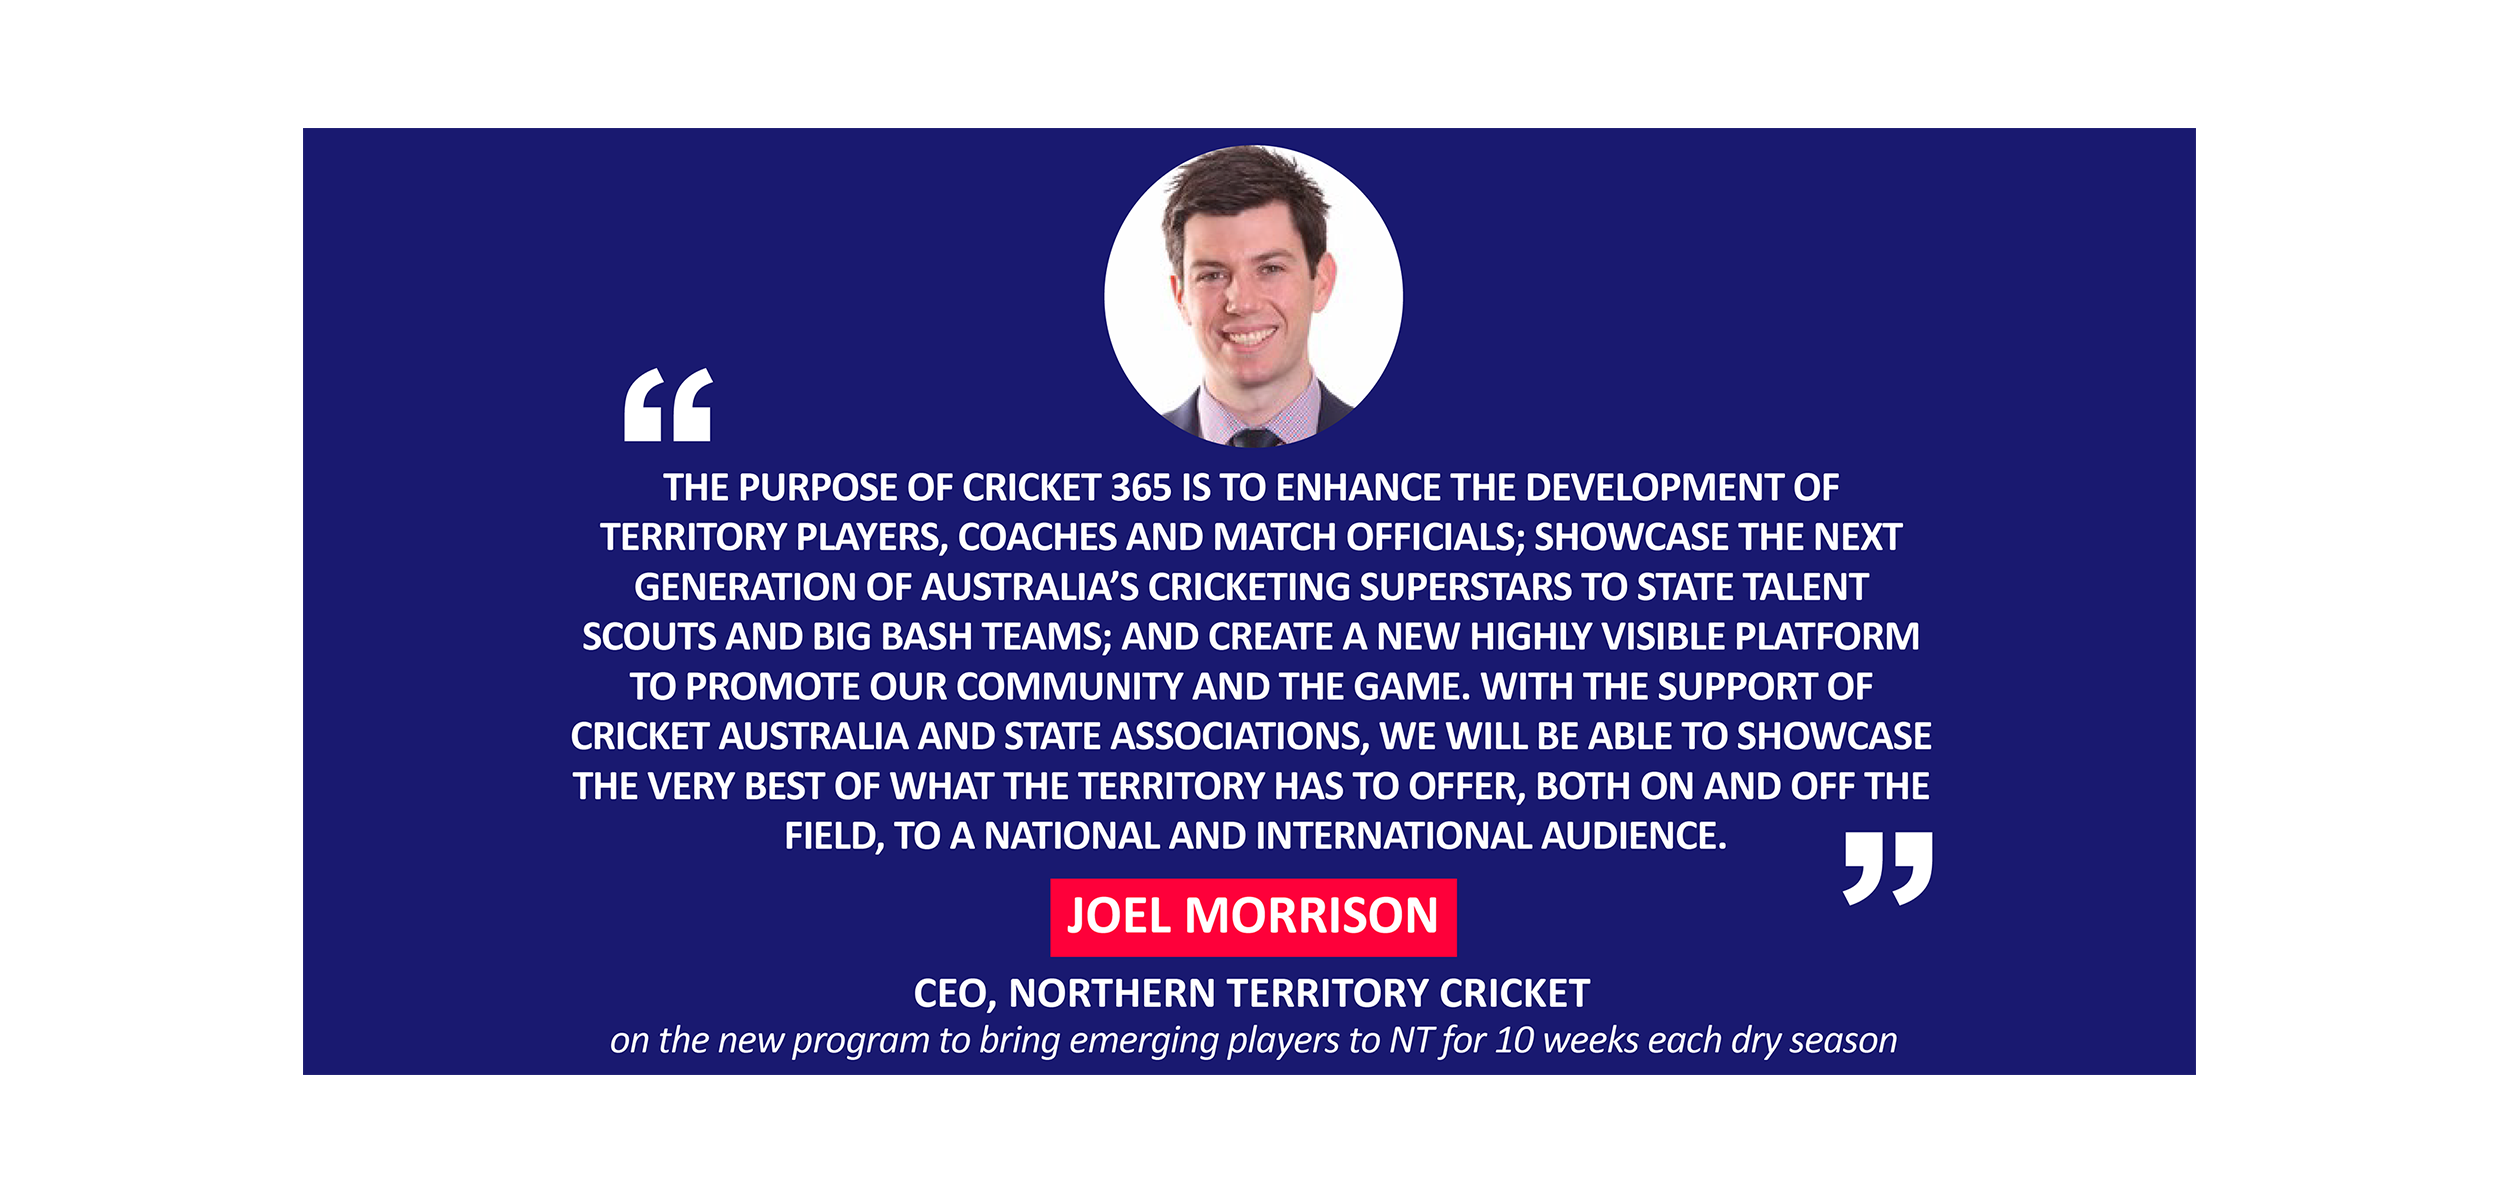 Joel Morrison, CEO, Northern Territory Cricket on the new program to bring emerging players to NT for 10 weeks each dry season